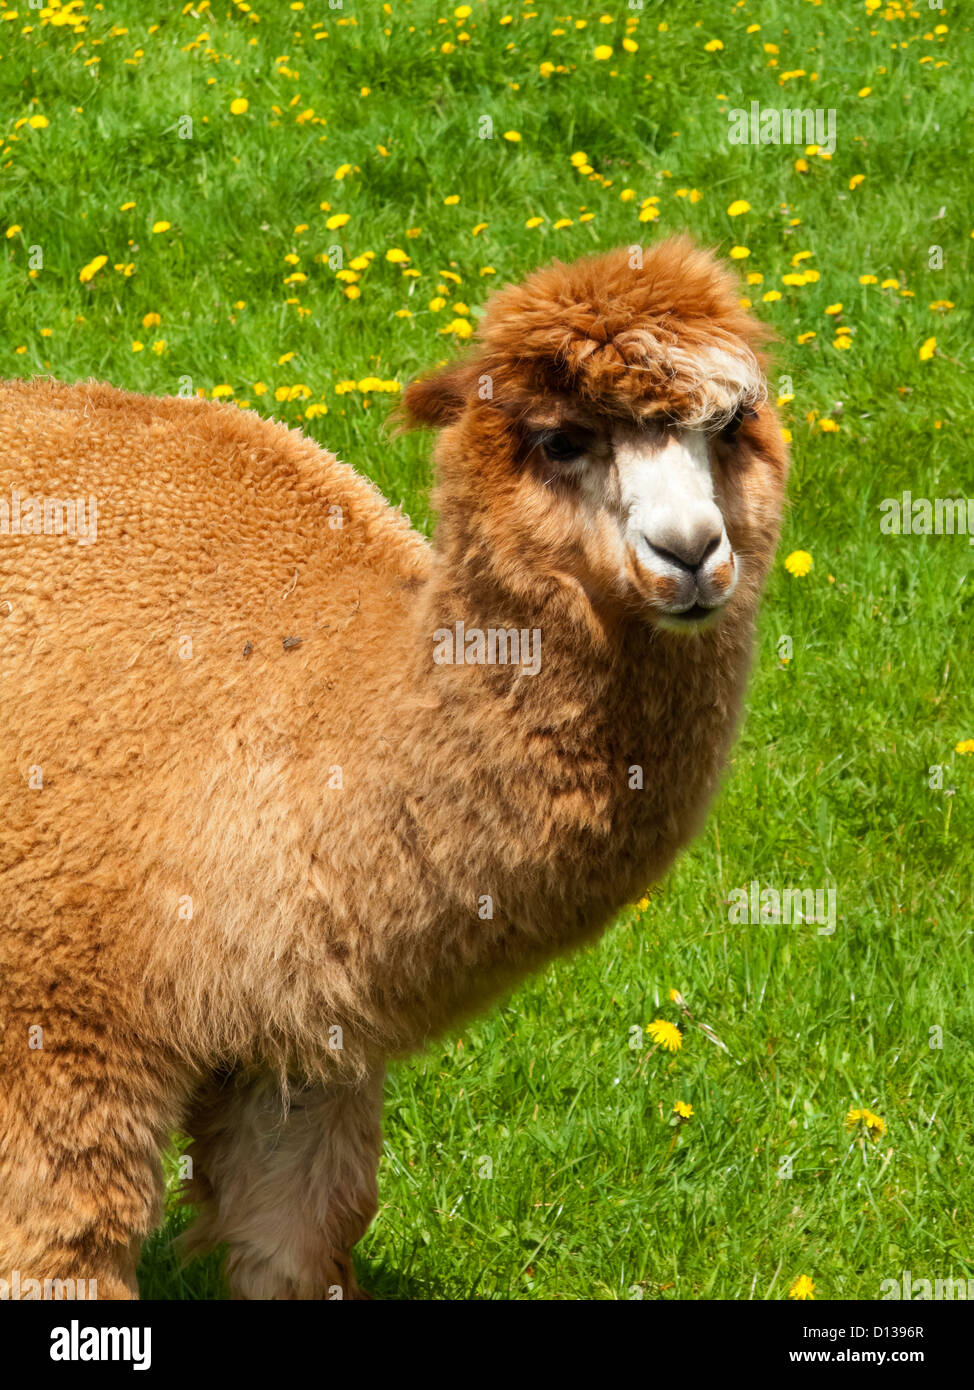 Alpaca Vicugna pacos a domesticated species of South American camelid grazing in a field of grass Stock Photo